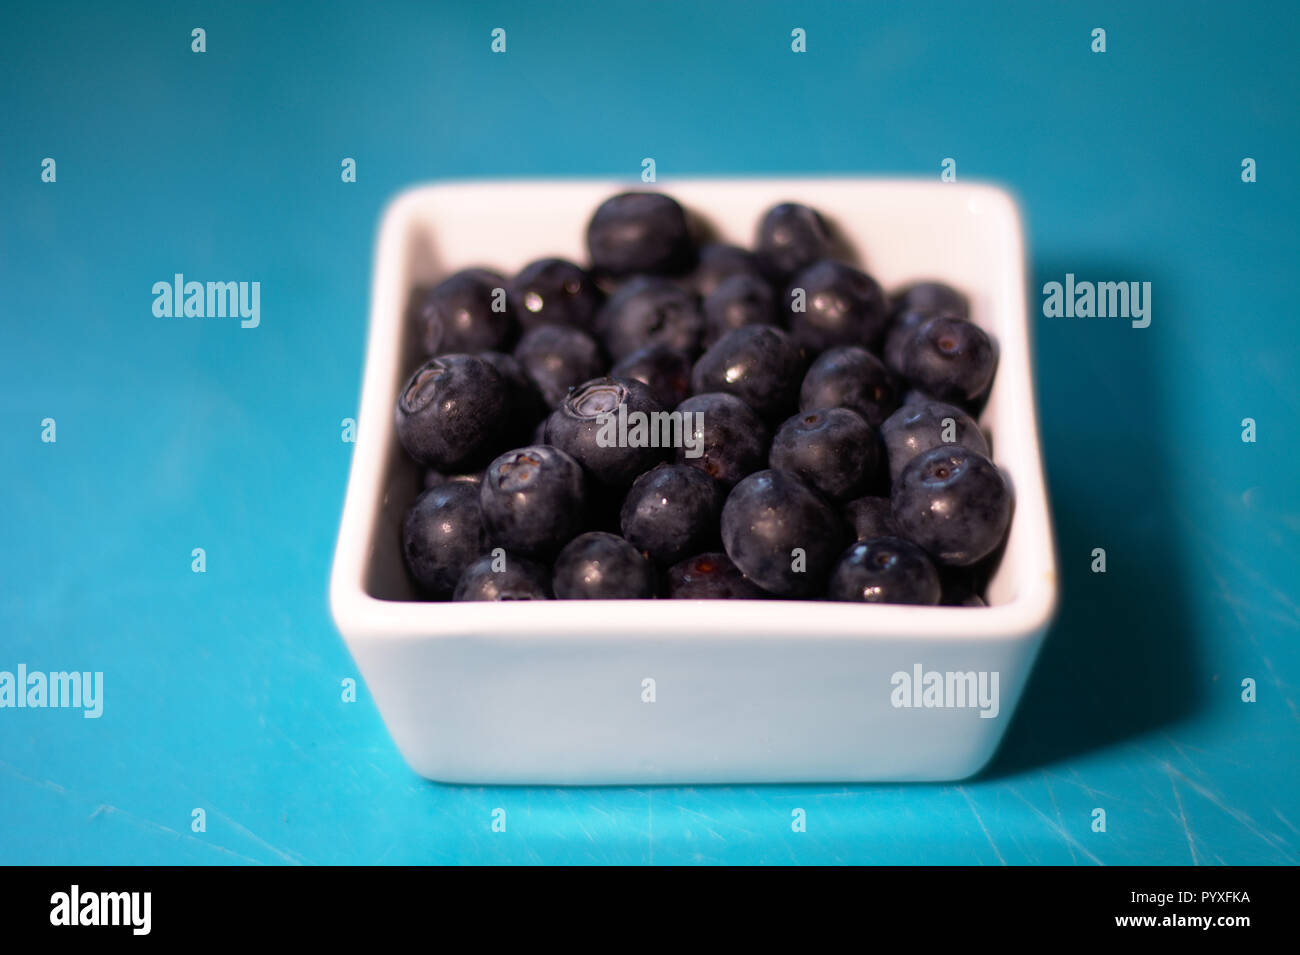 Blueberries in a dish Stock Photo